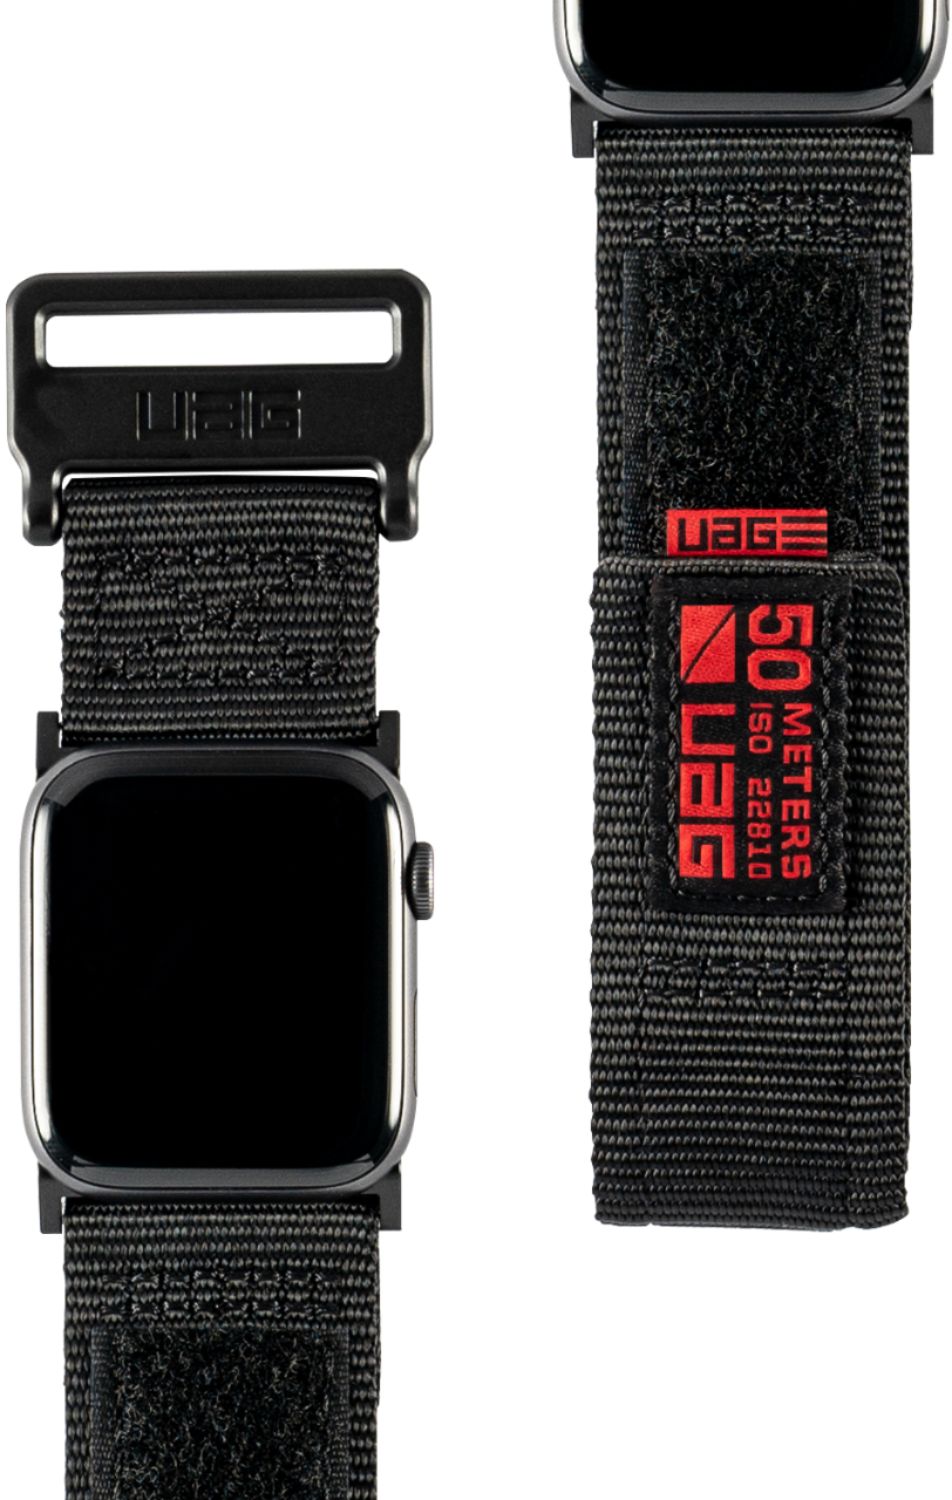 under armour apple watch bands